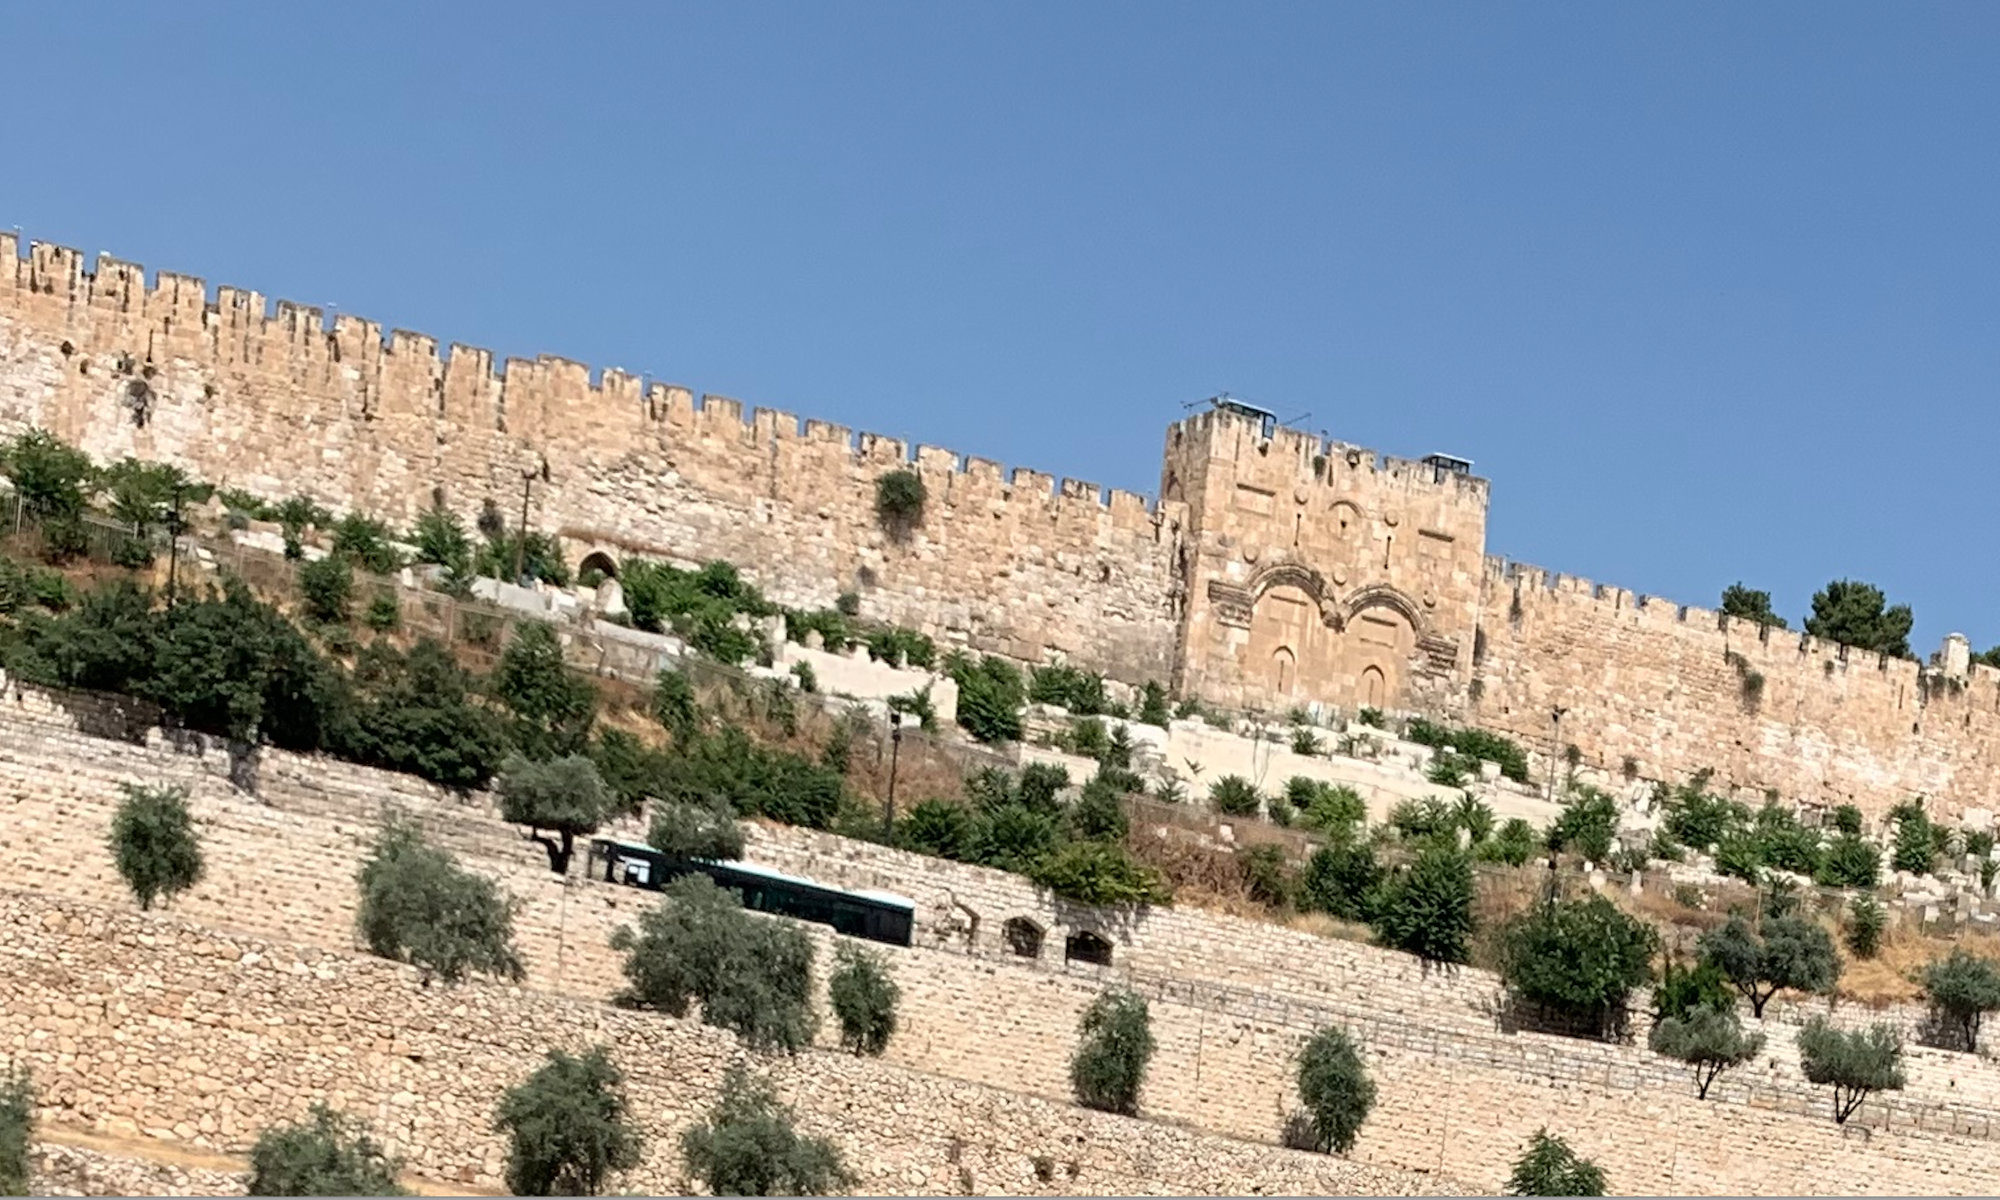 The Golden Gate at the Temple Mount in Jerusalem